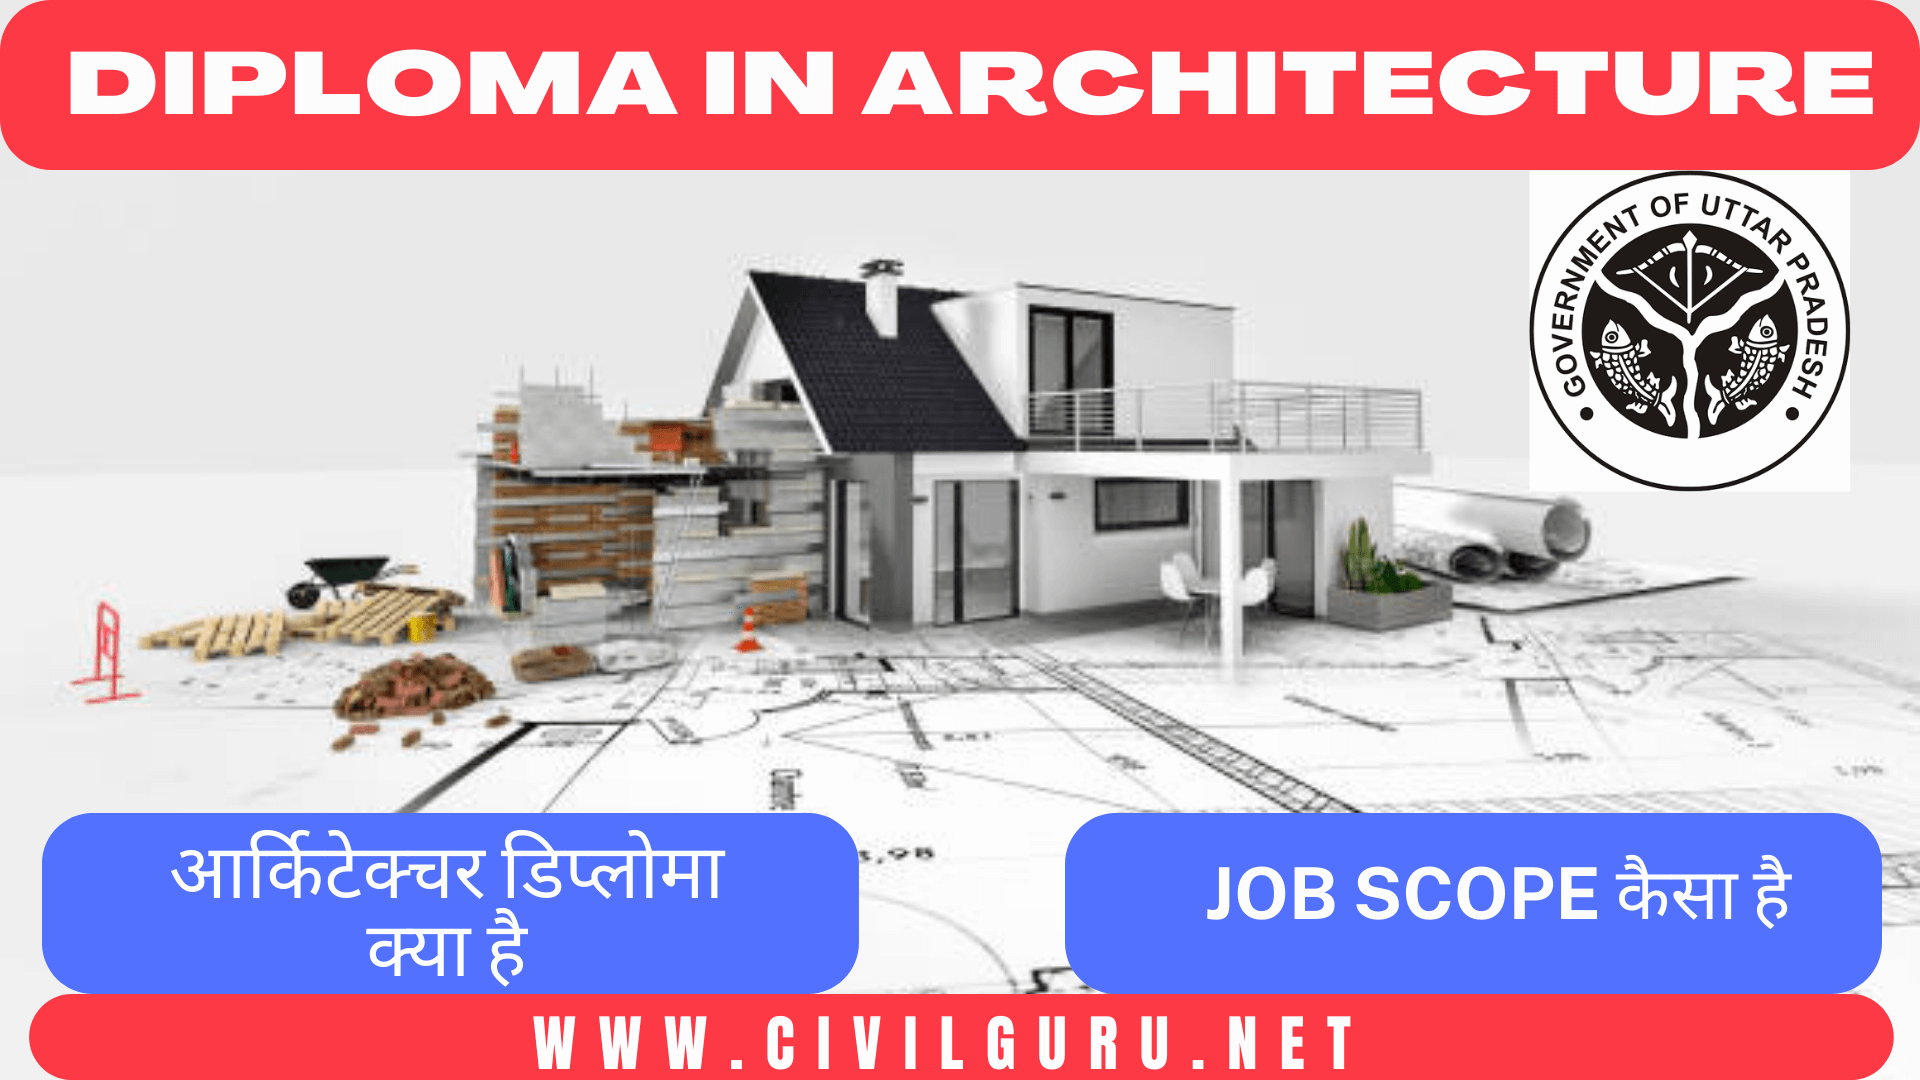 Diploma in Architectural Assistantship